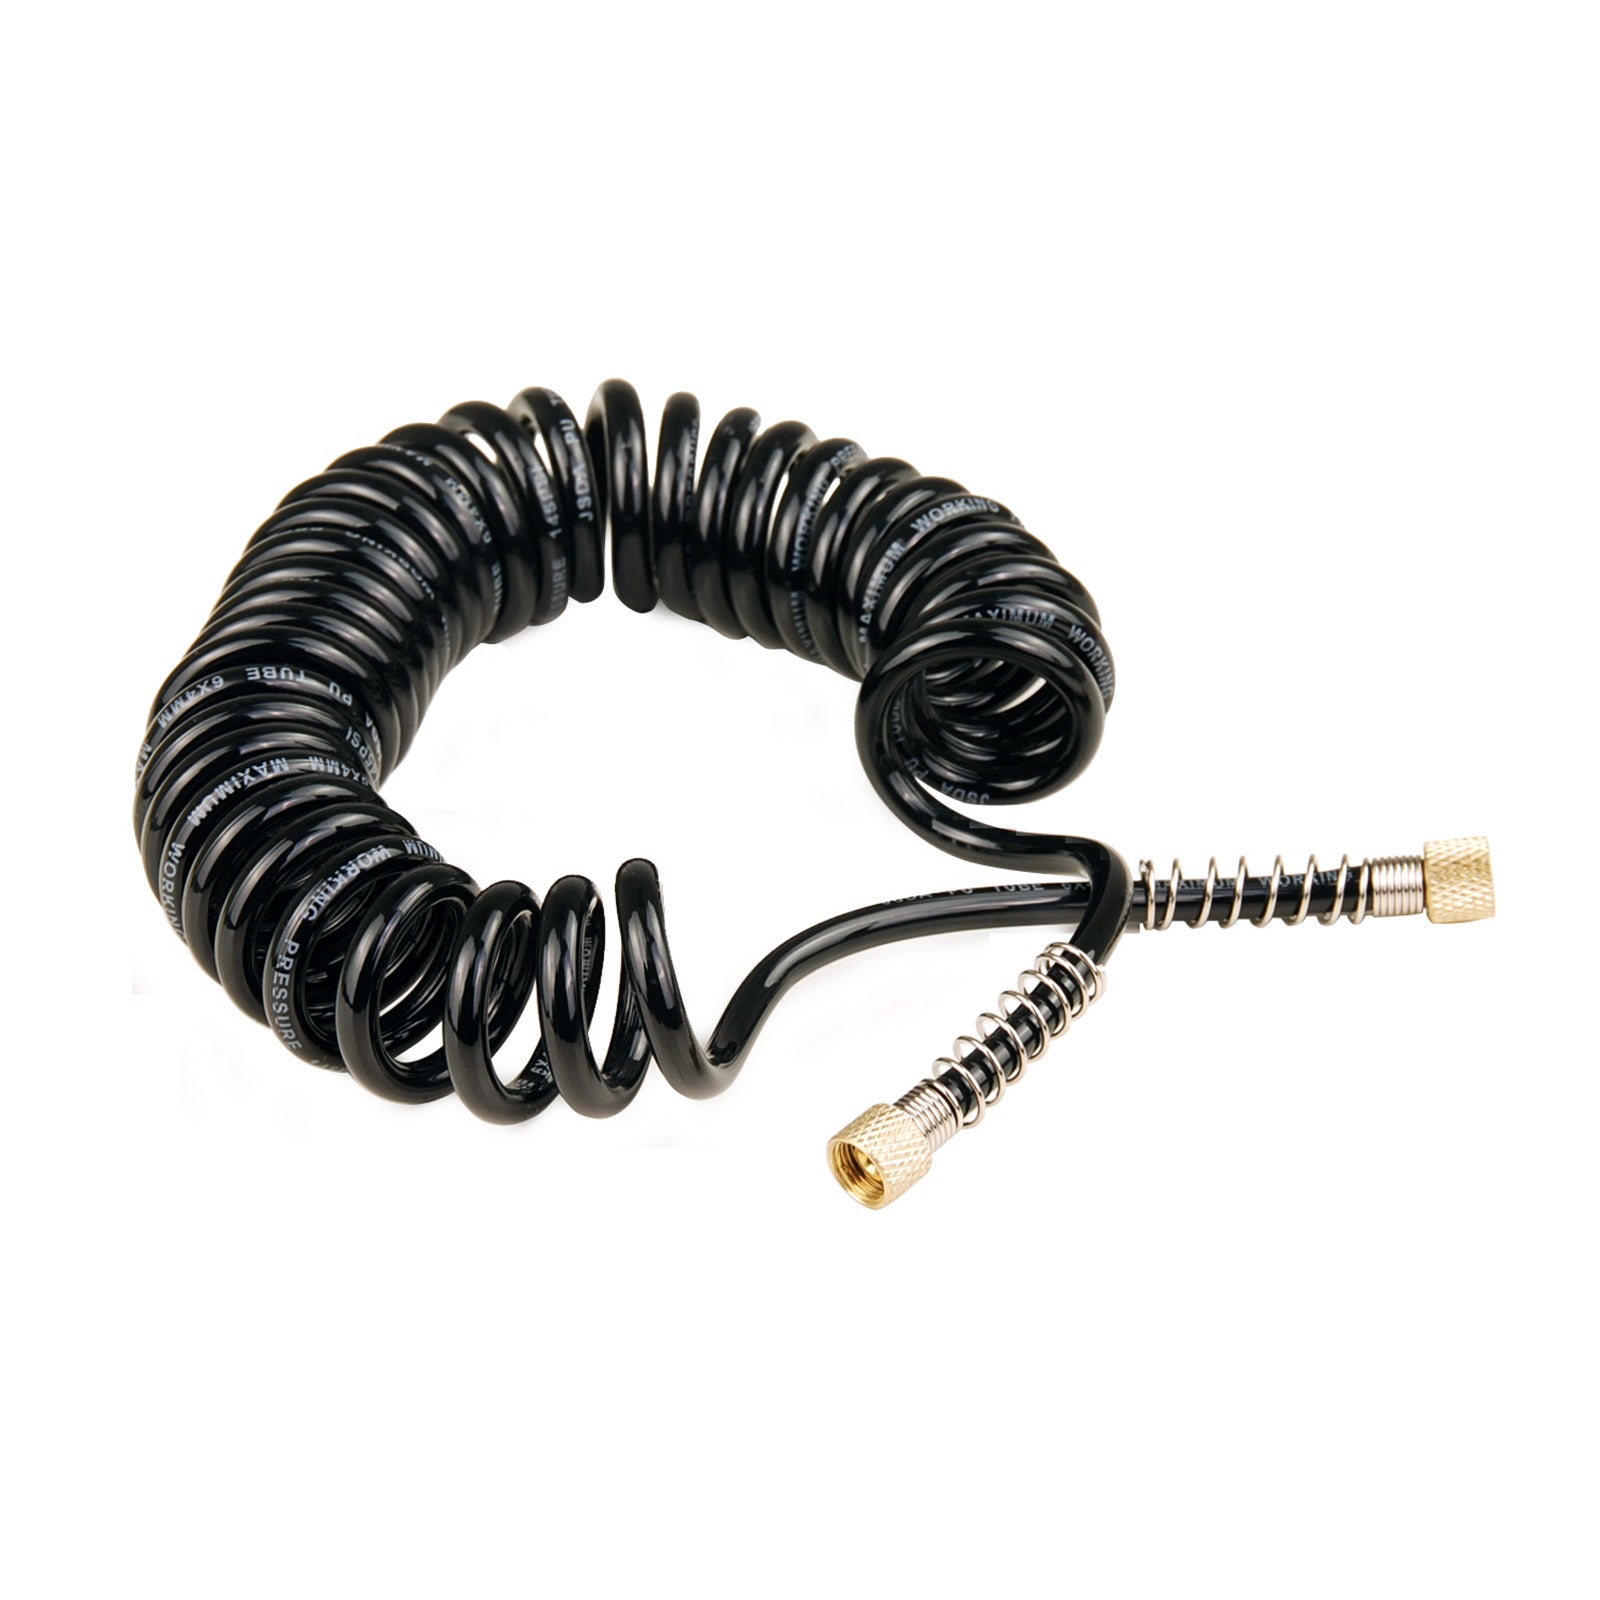 Dynamic Power Air Brush Hose Coiled Retractable Compressor 1/8in 3M - SILBERSHELL